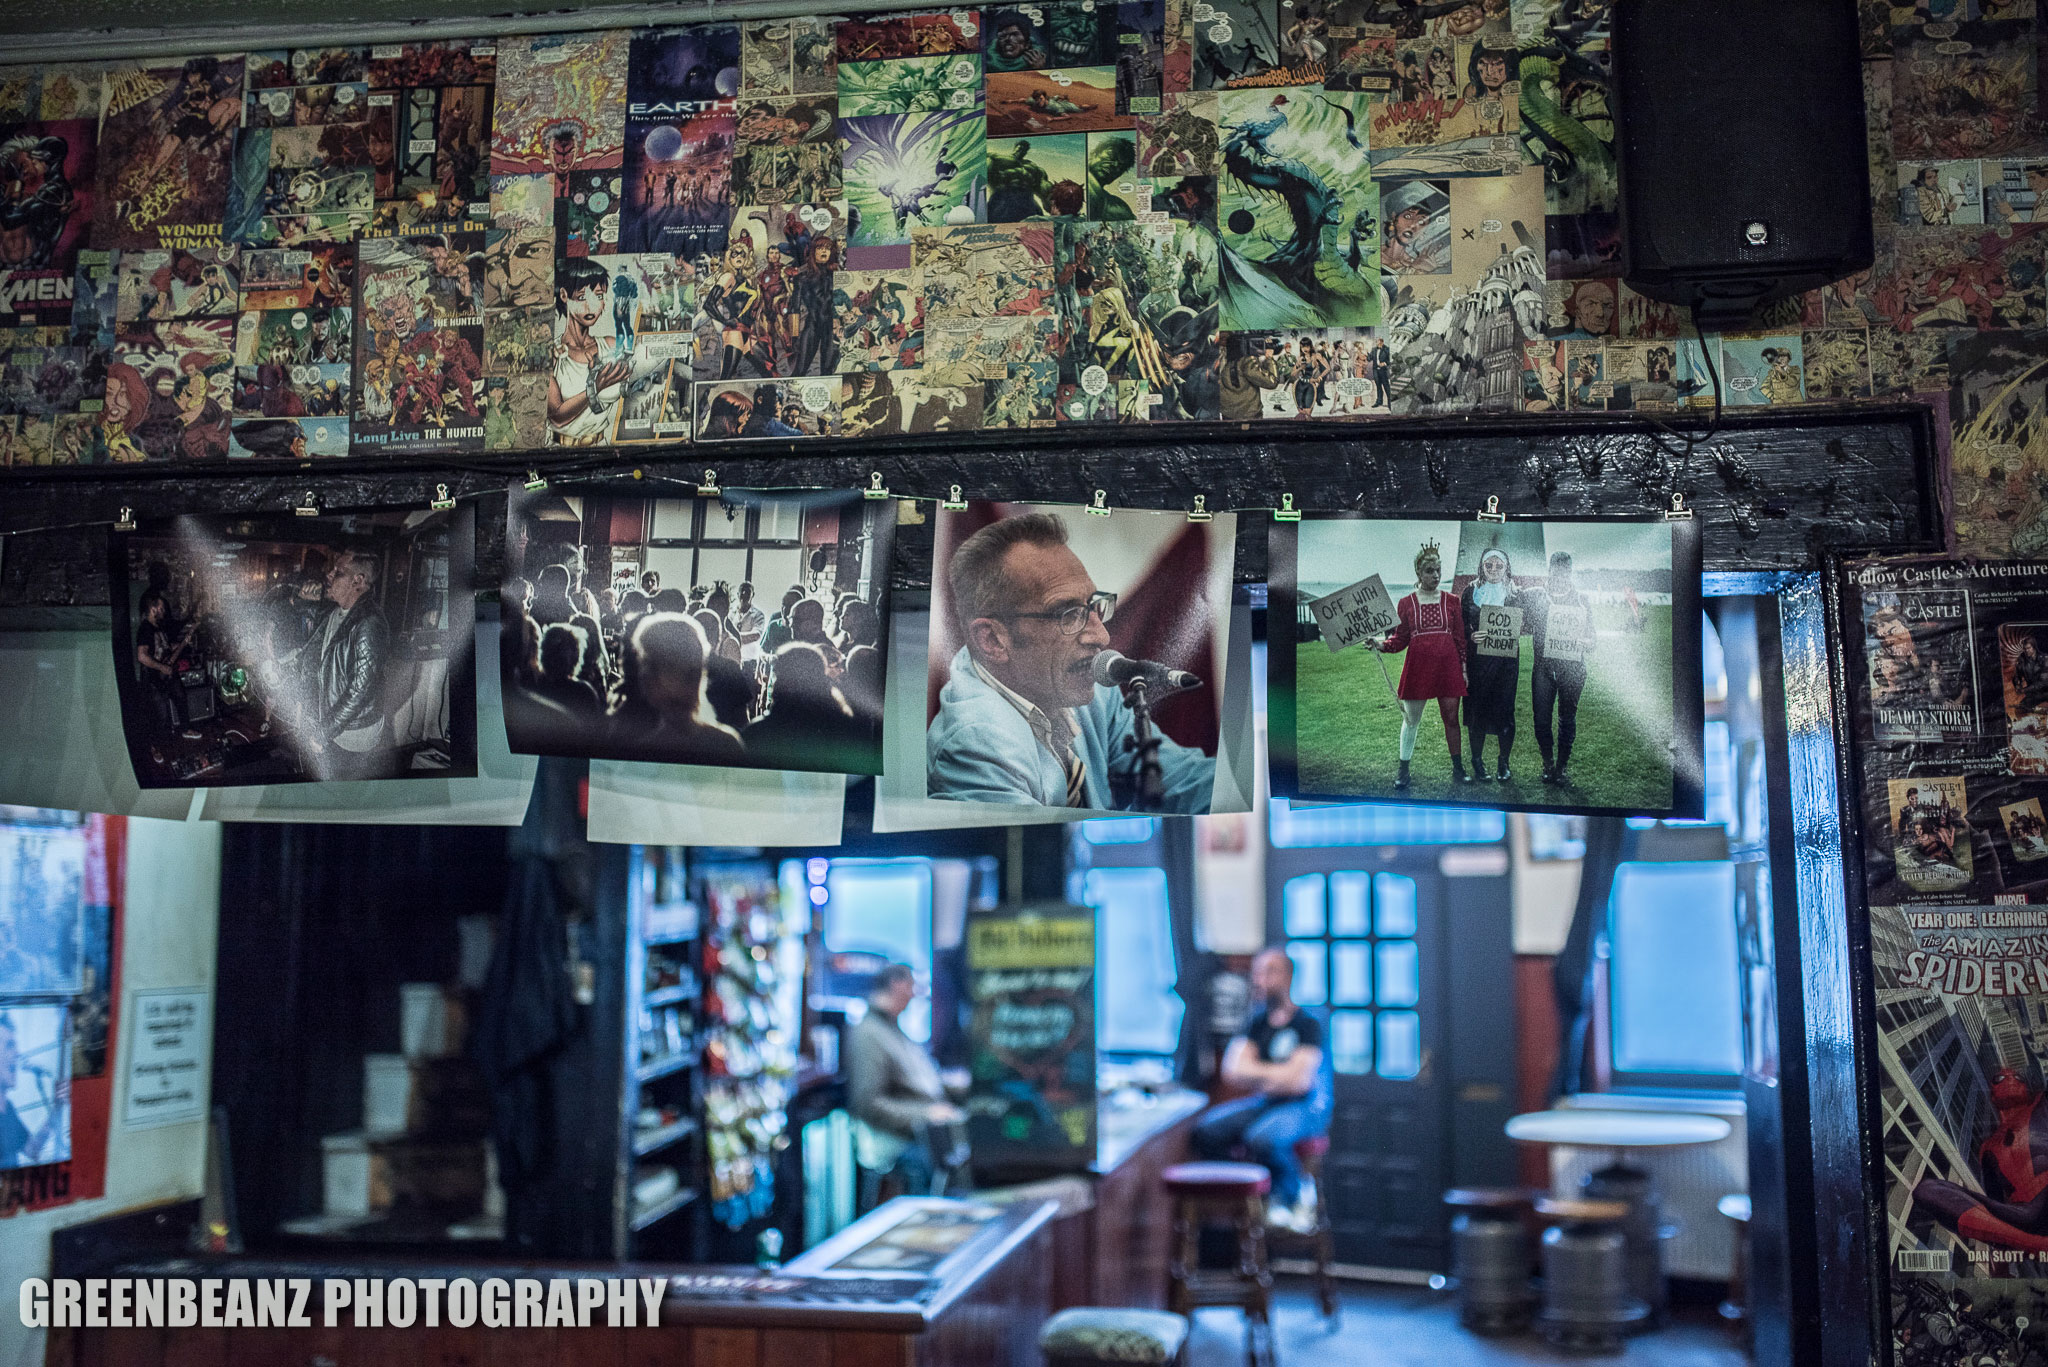 Plymouth Music Photography exhibition at the Nowhere Inn 